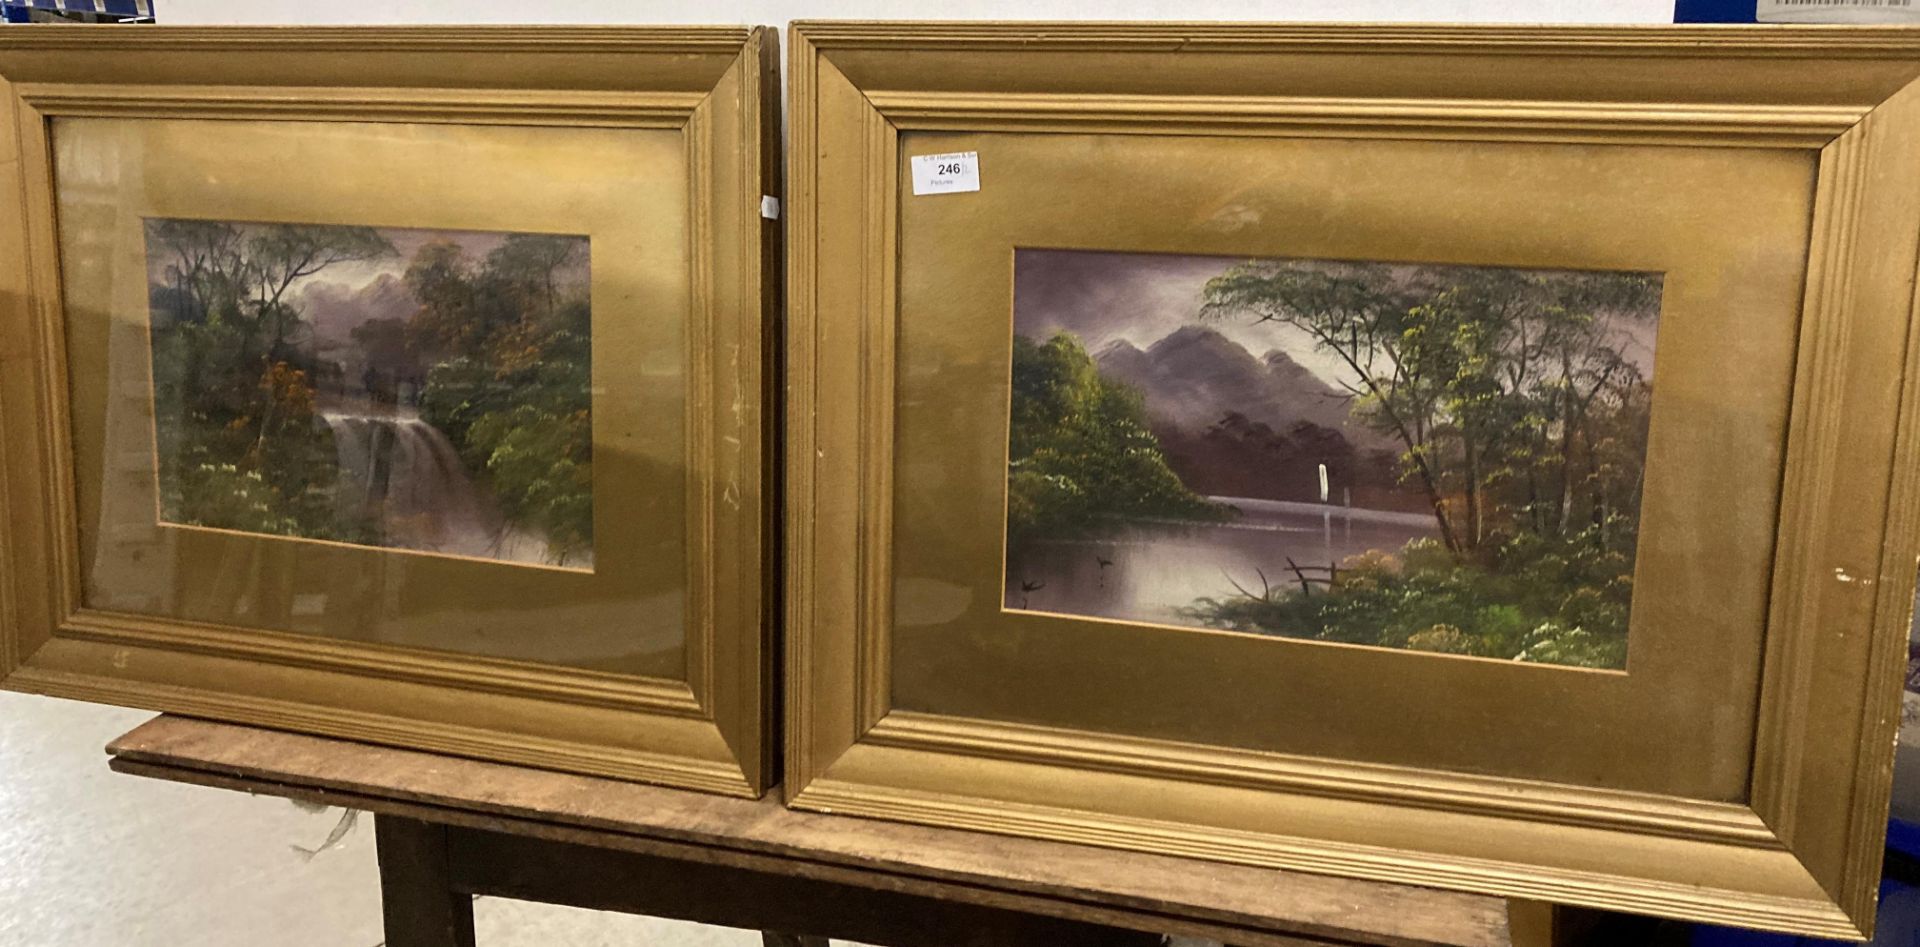 A pair of gilt framed watercolours - 'Oriental Waterfall' and 'Oriental Lake',